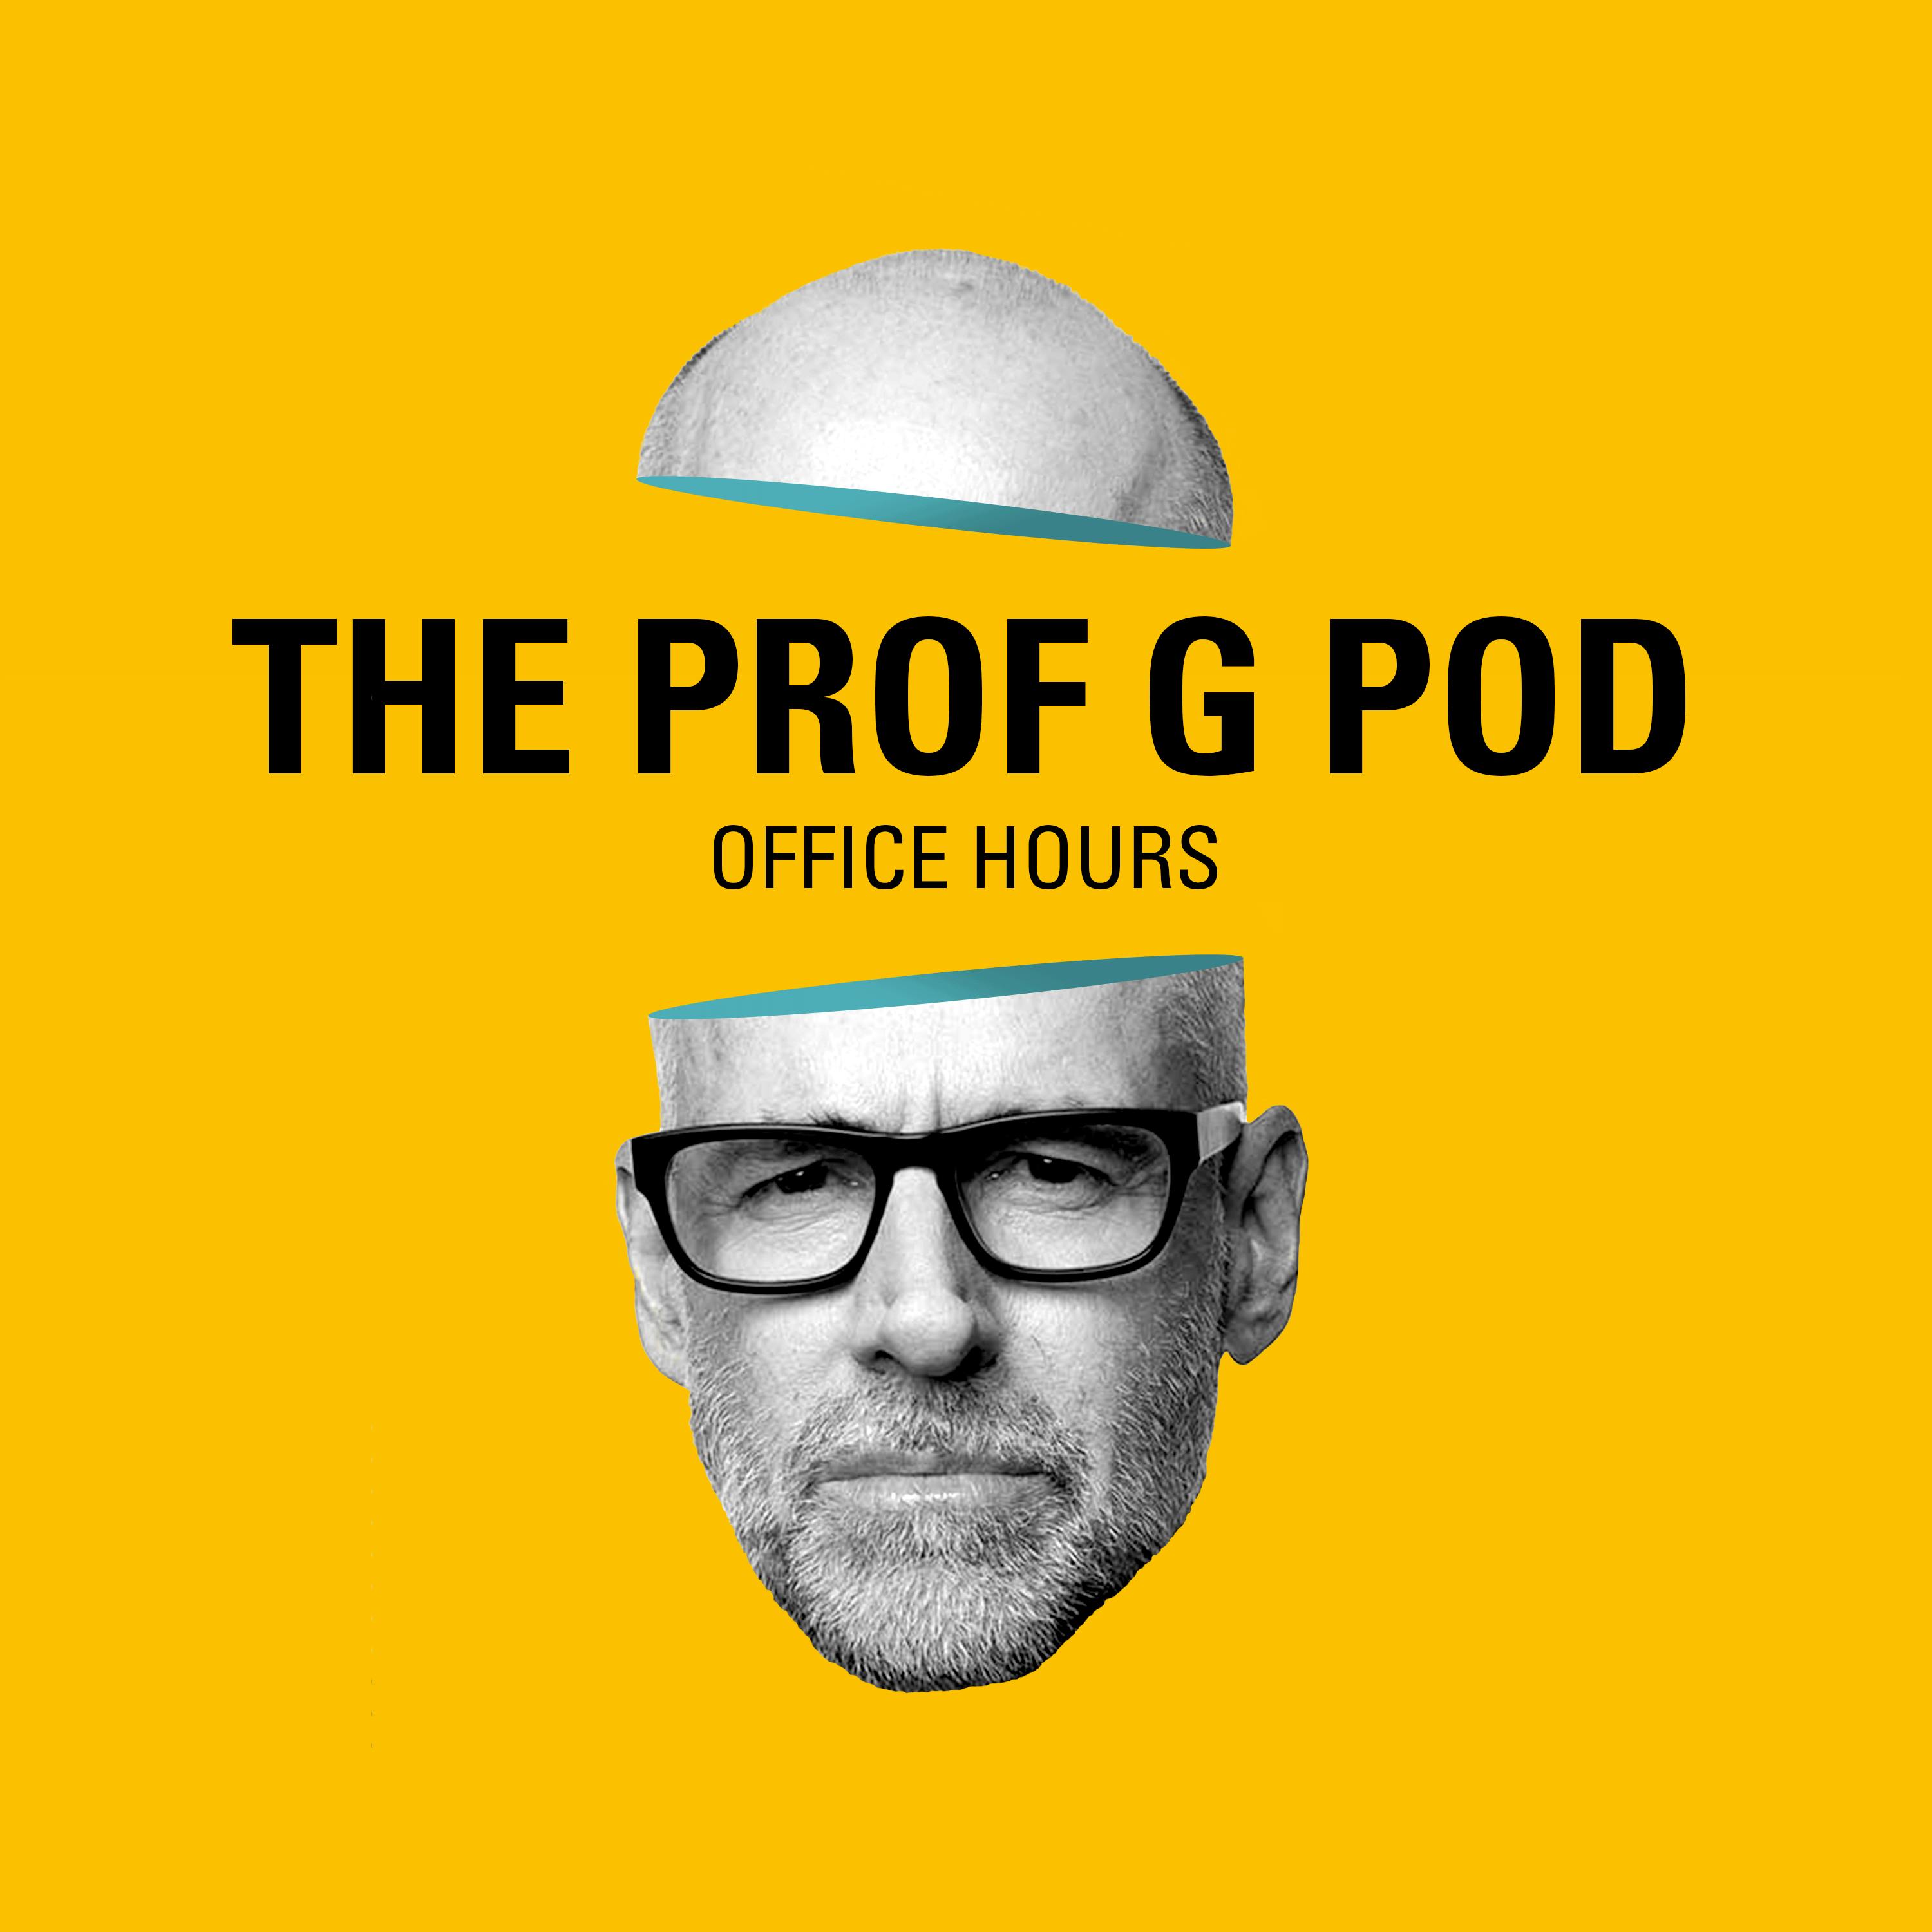 Office Hours: Are Fitness Brands the New Religion? The Tyranny of OPEC, and Fighting the Cost of Higher Ed